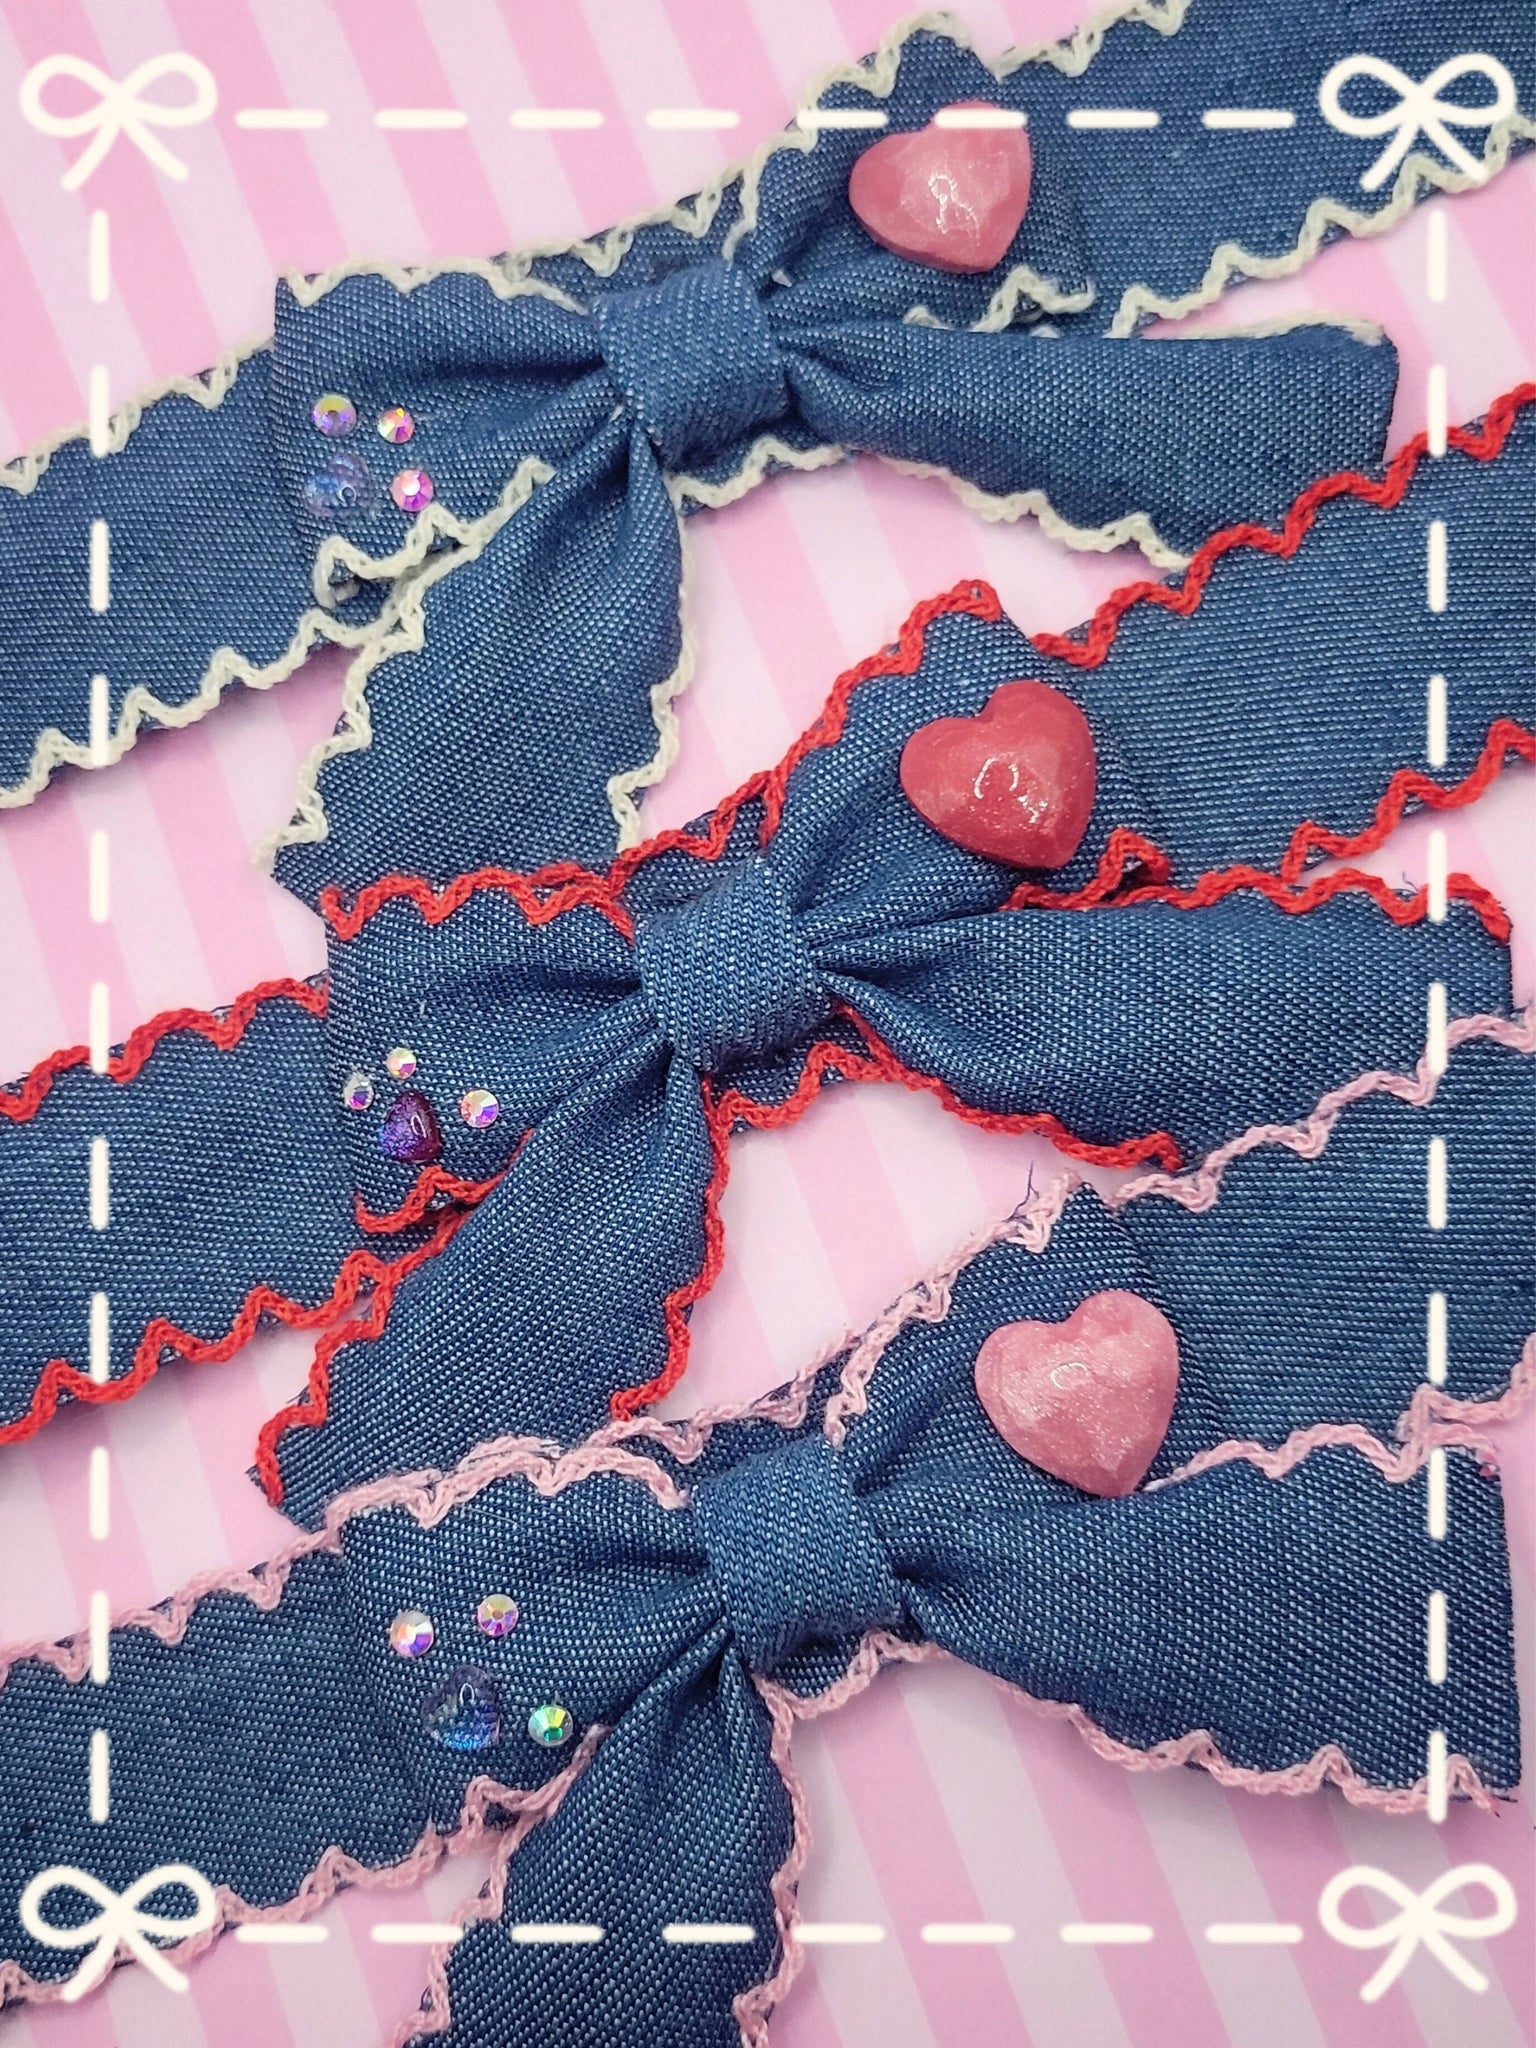 Jean Bow Heart Choker - Made-to-order